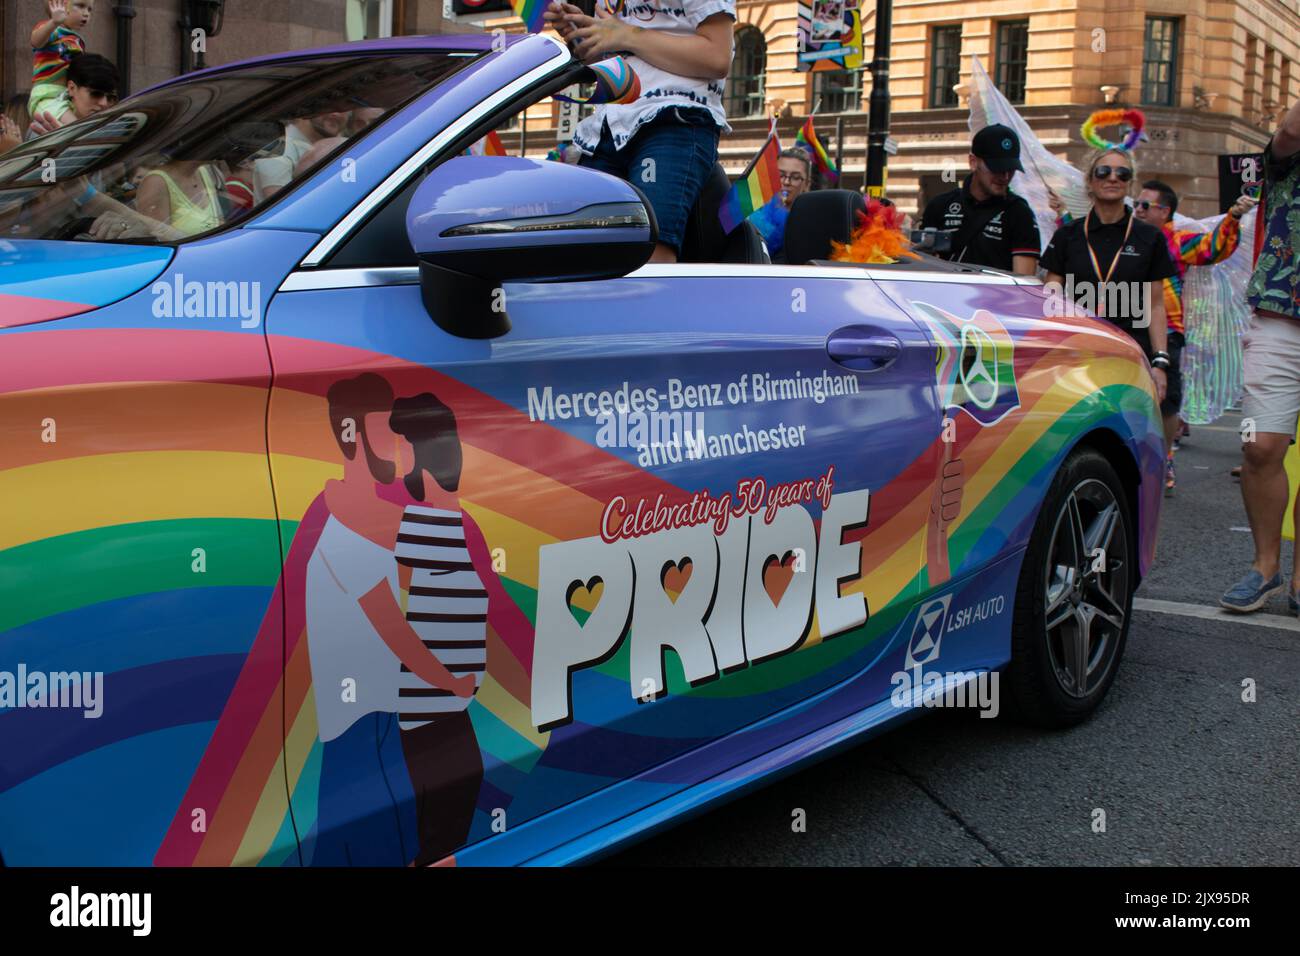 Manchester Pride parade. Mercedes Benz car painted with rainbow and text Celebrating 50 years of Pride. Theme March for Peace. Stock Photo